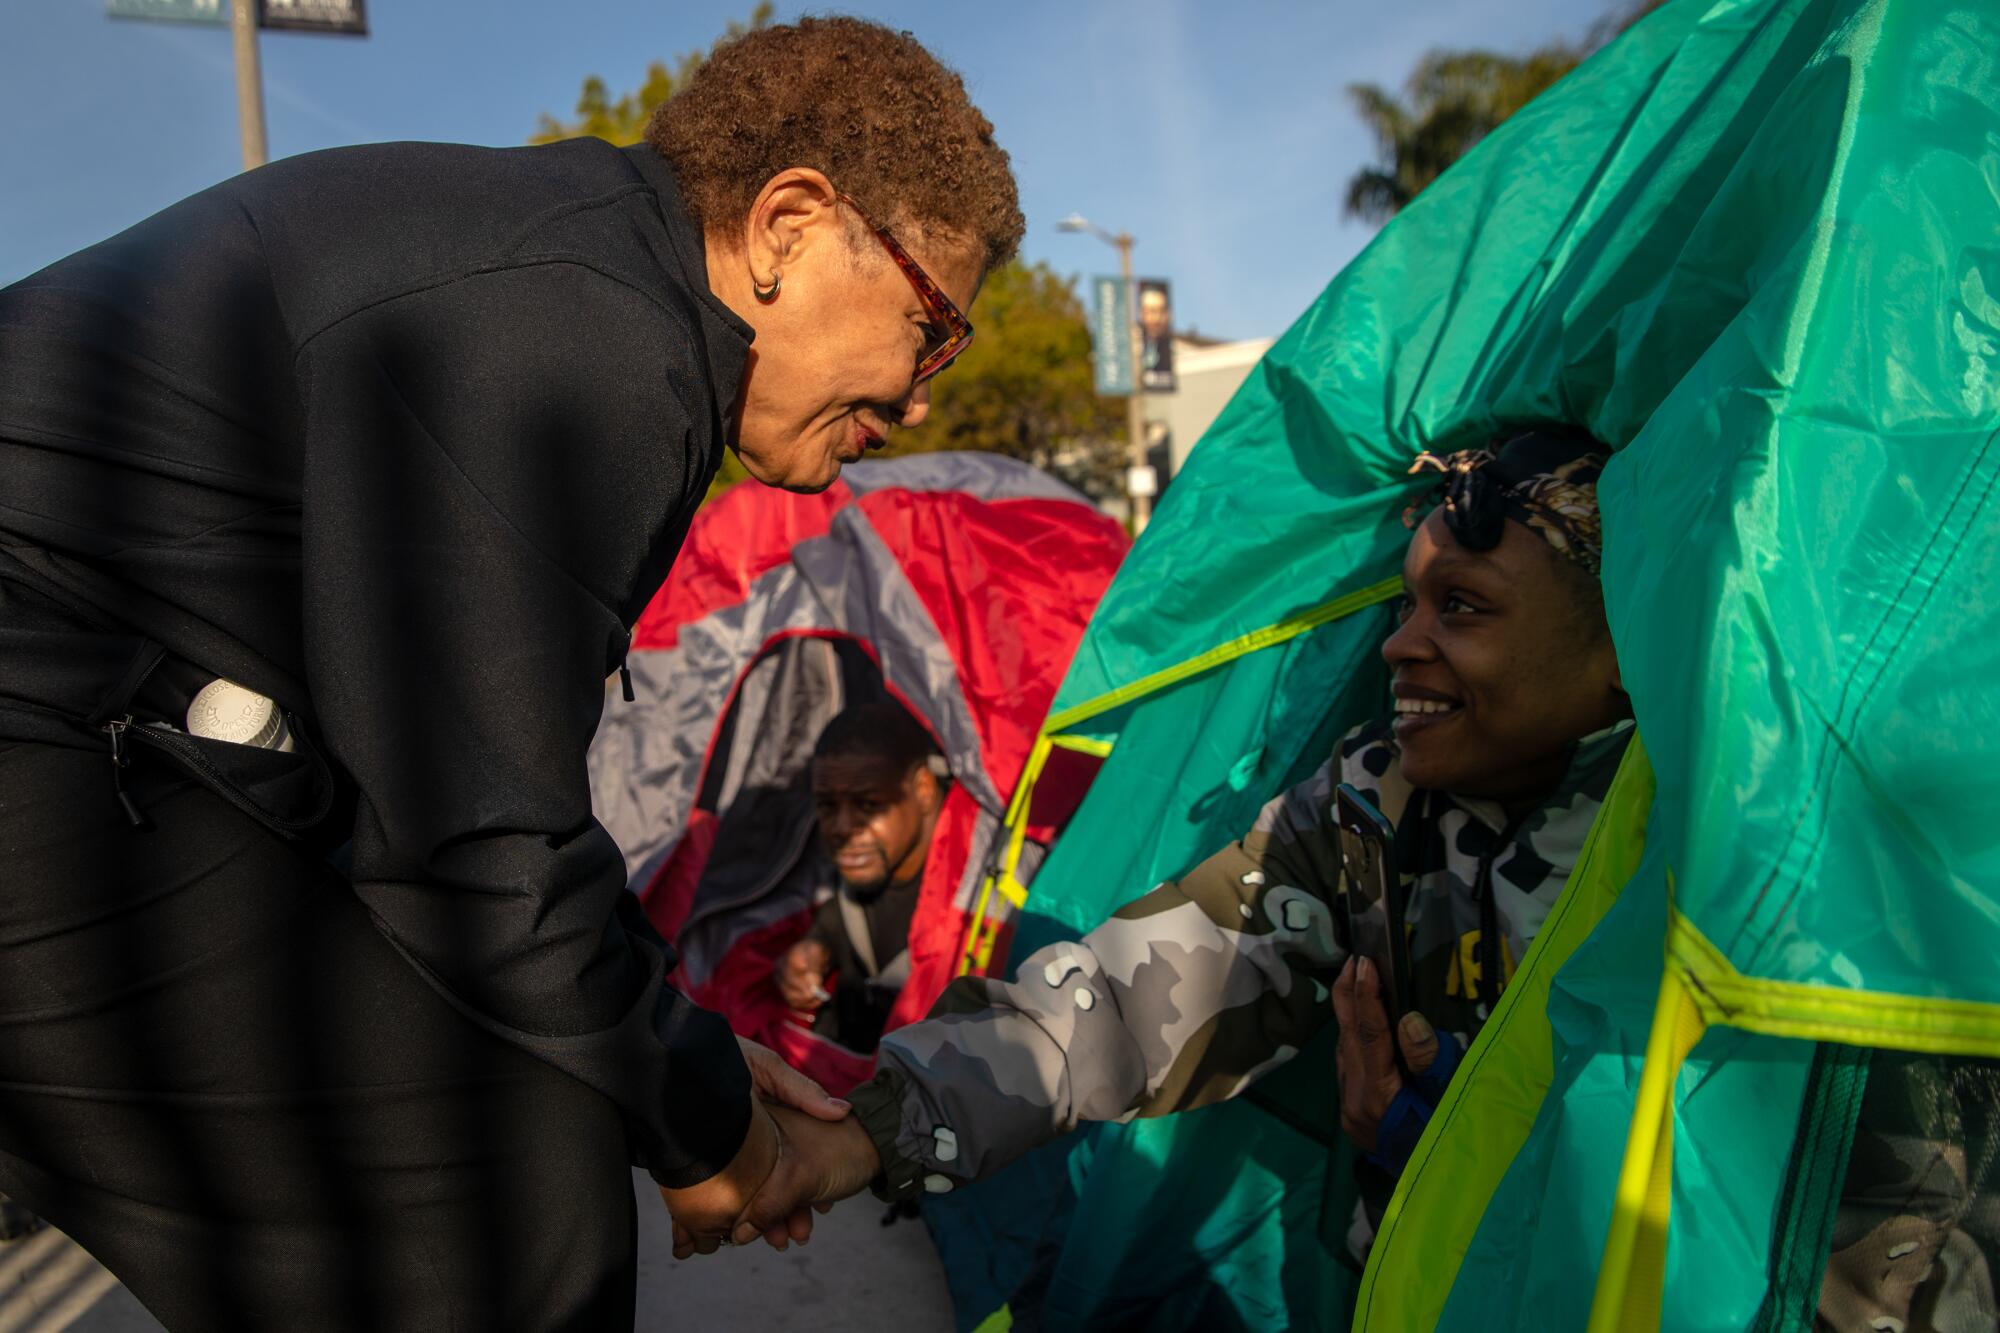 Mayor Karen Bass with Jawonna Smith, 33, who lived in a tent on a sidewalk before she was moved to a motel.